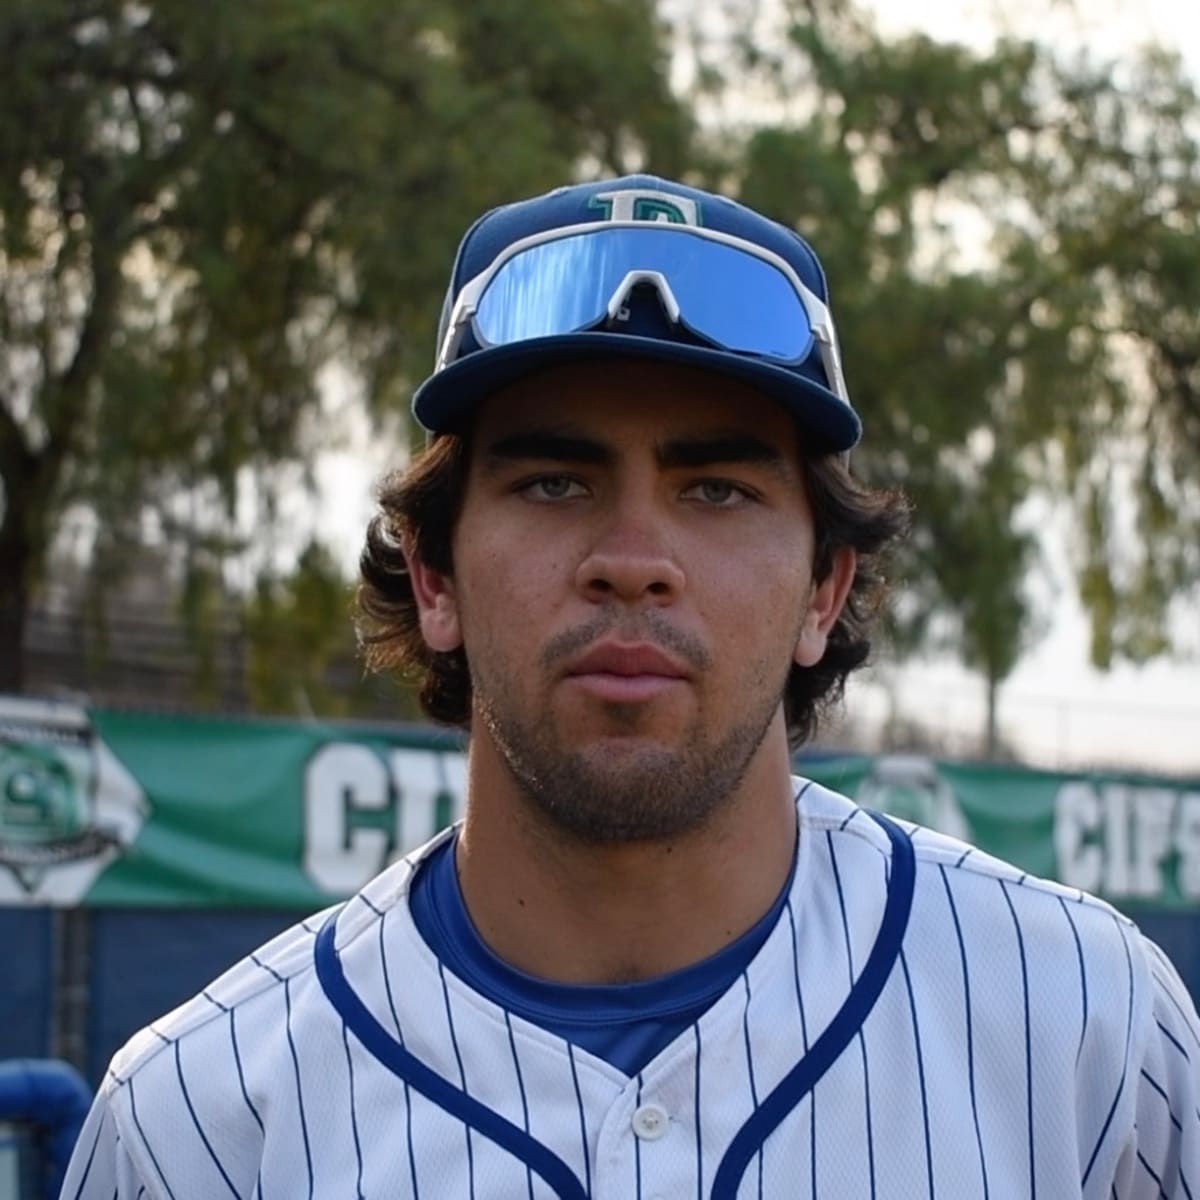 Watch: Eastlake shortstop Marcelo Mayer discusses his final at-bat and his  time with the Titans - Sports Illustrated High School News, Analysis and  More